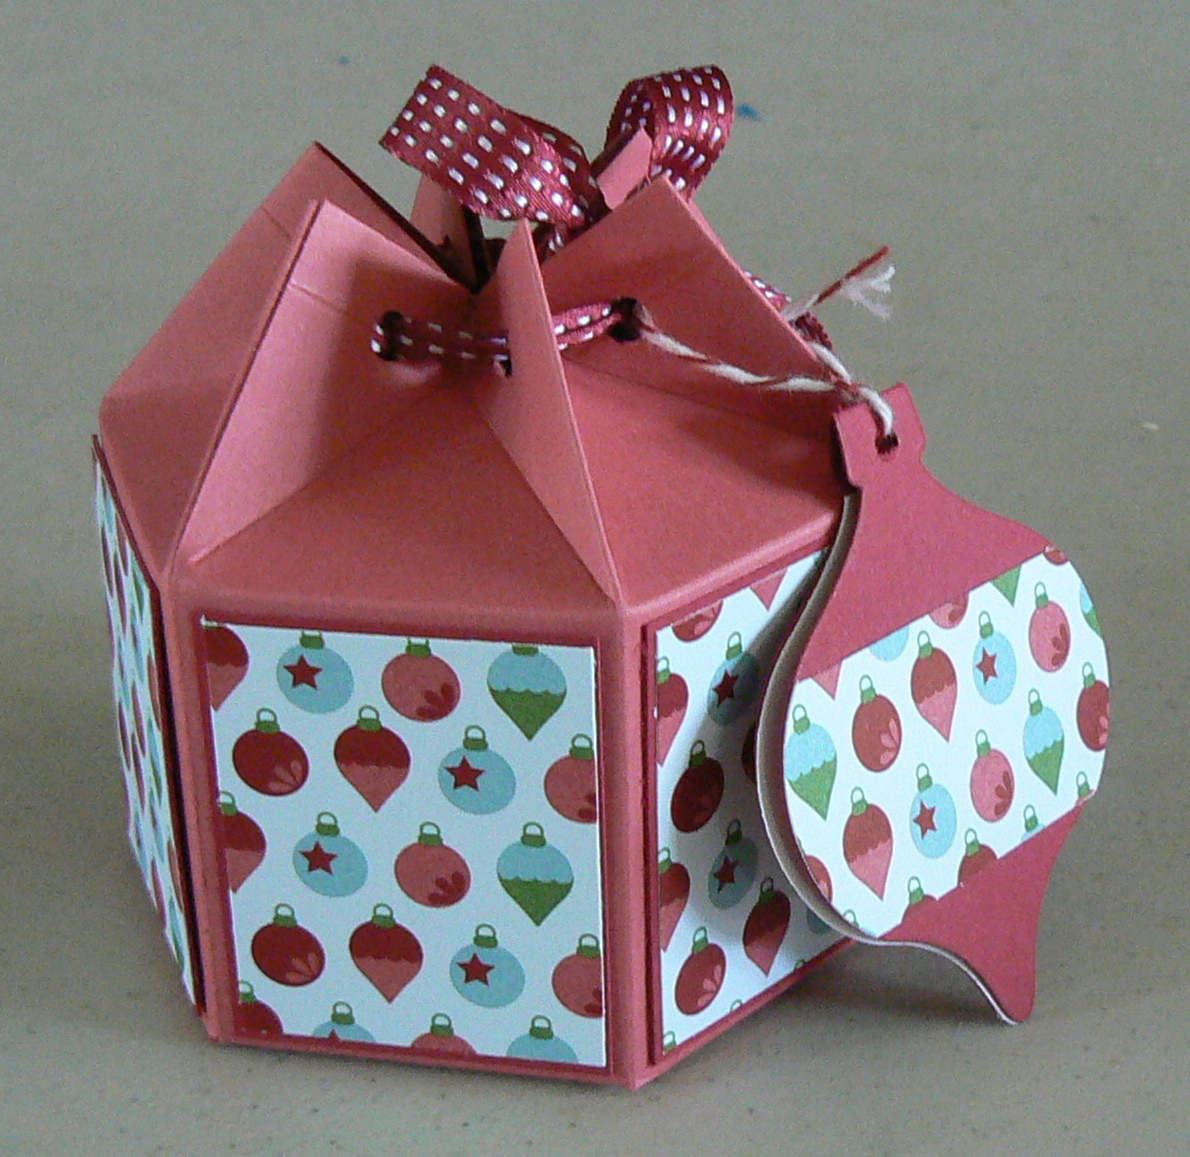 Kerry's Papercraft: Christmas Boxes and Tags